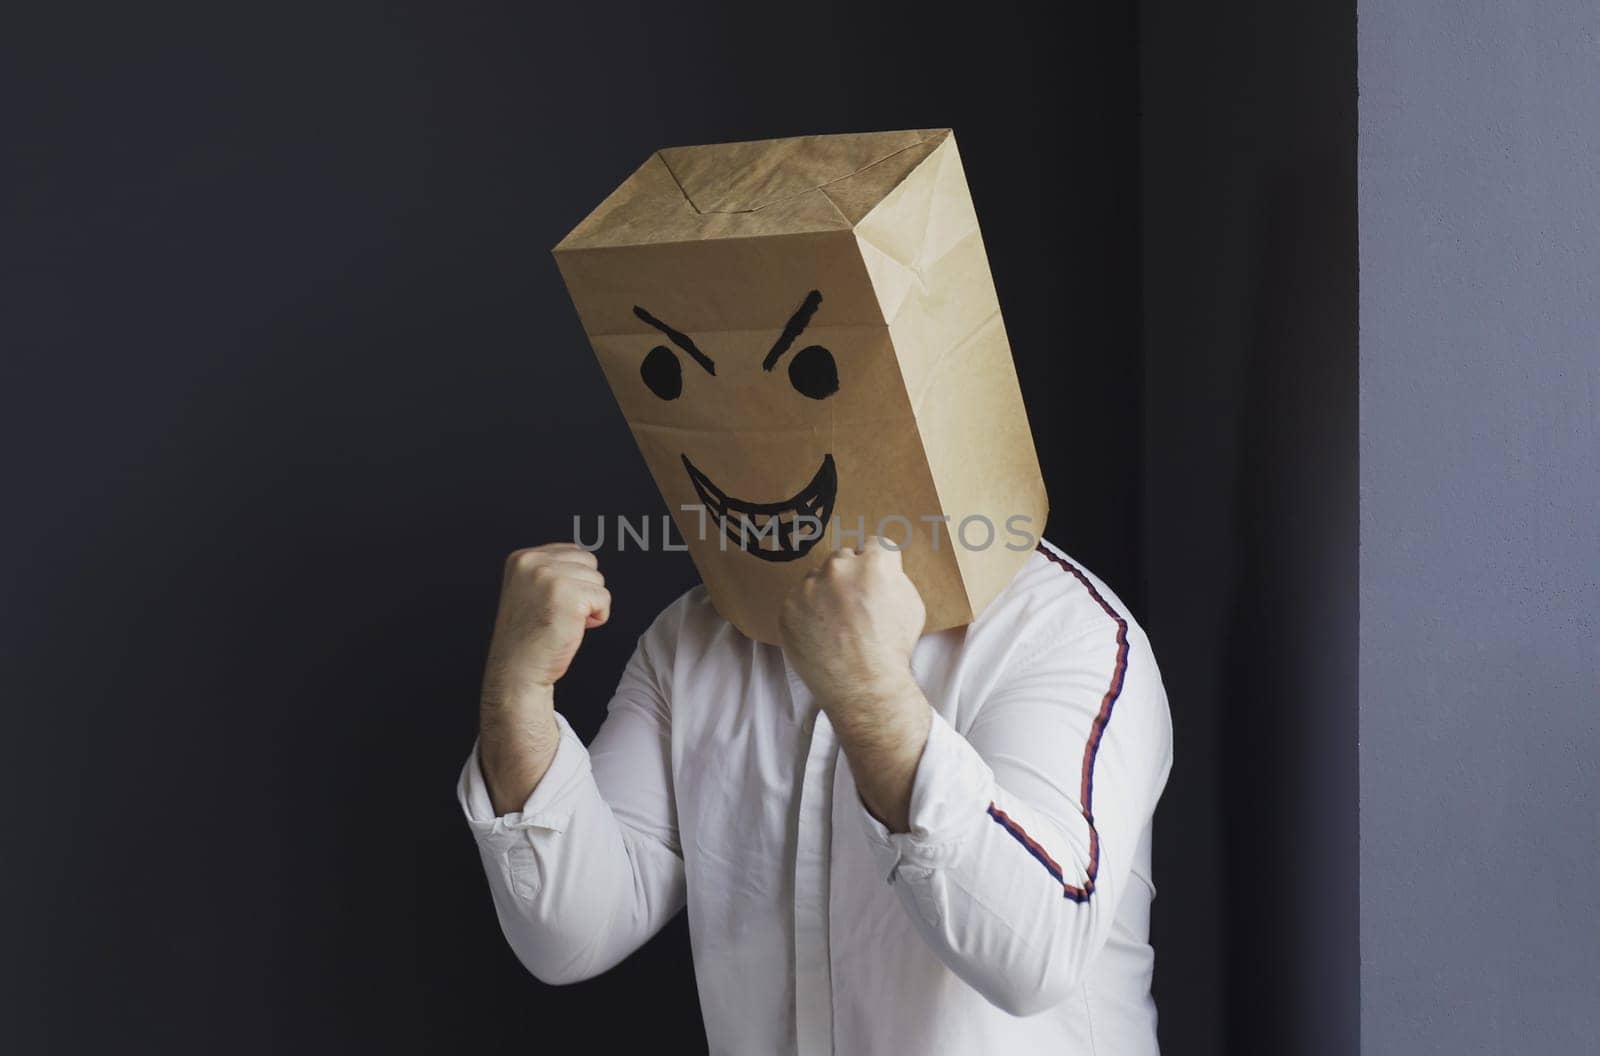 A man in a white shirt with a paper bag with an angry emoticon on his head gesticulates aggressively with his hands. Emotions and anger